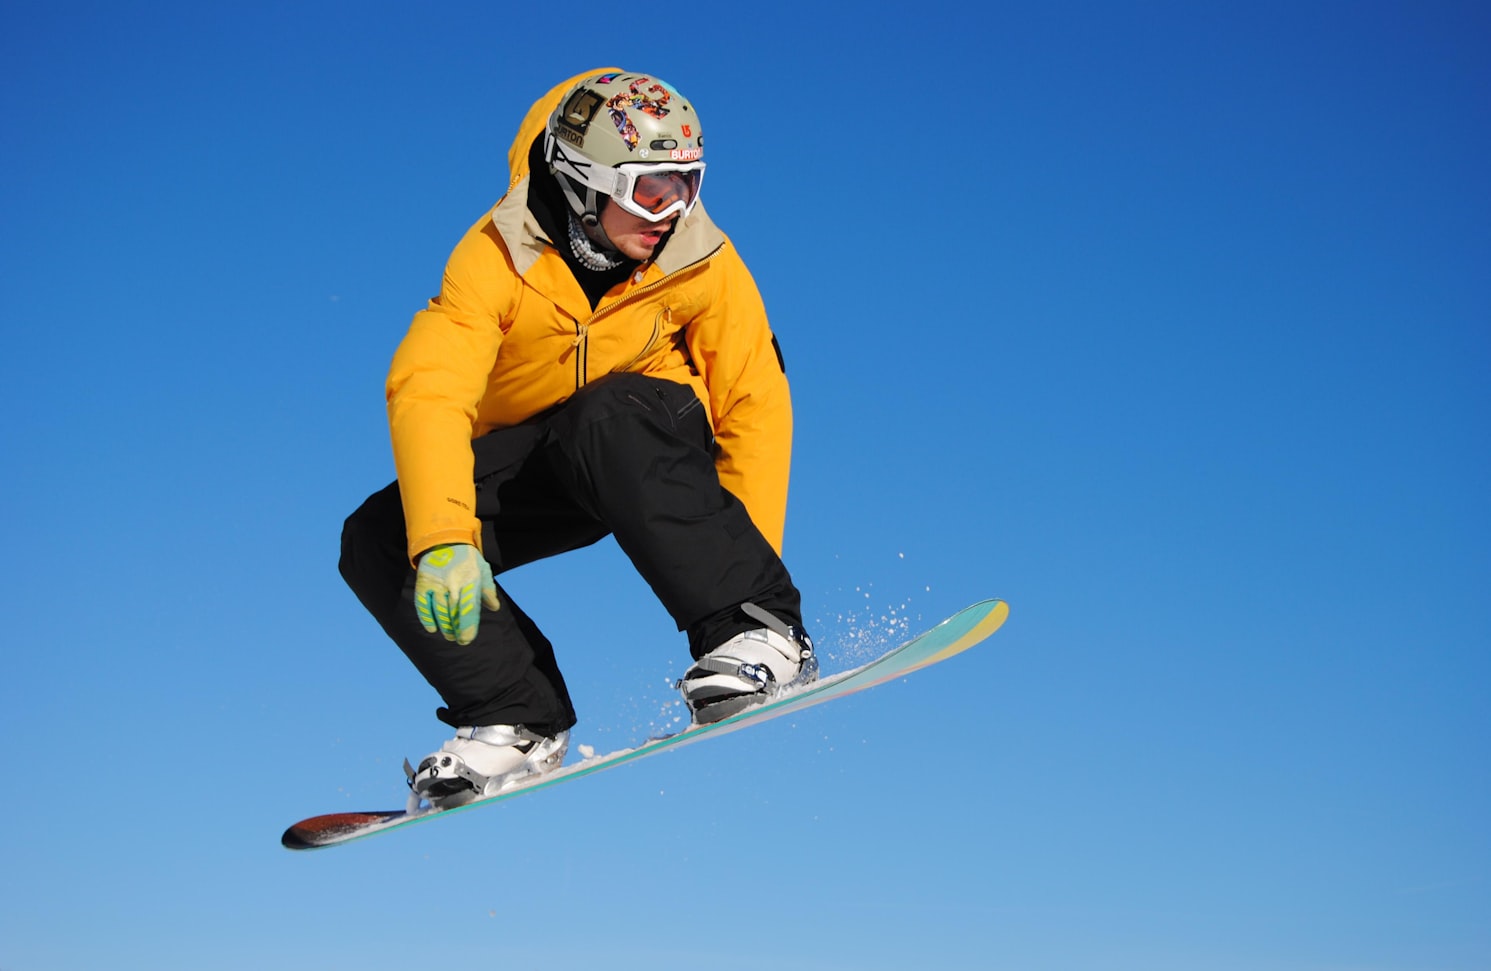 Top 10 Snowboard For Big Guys To Buy Online